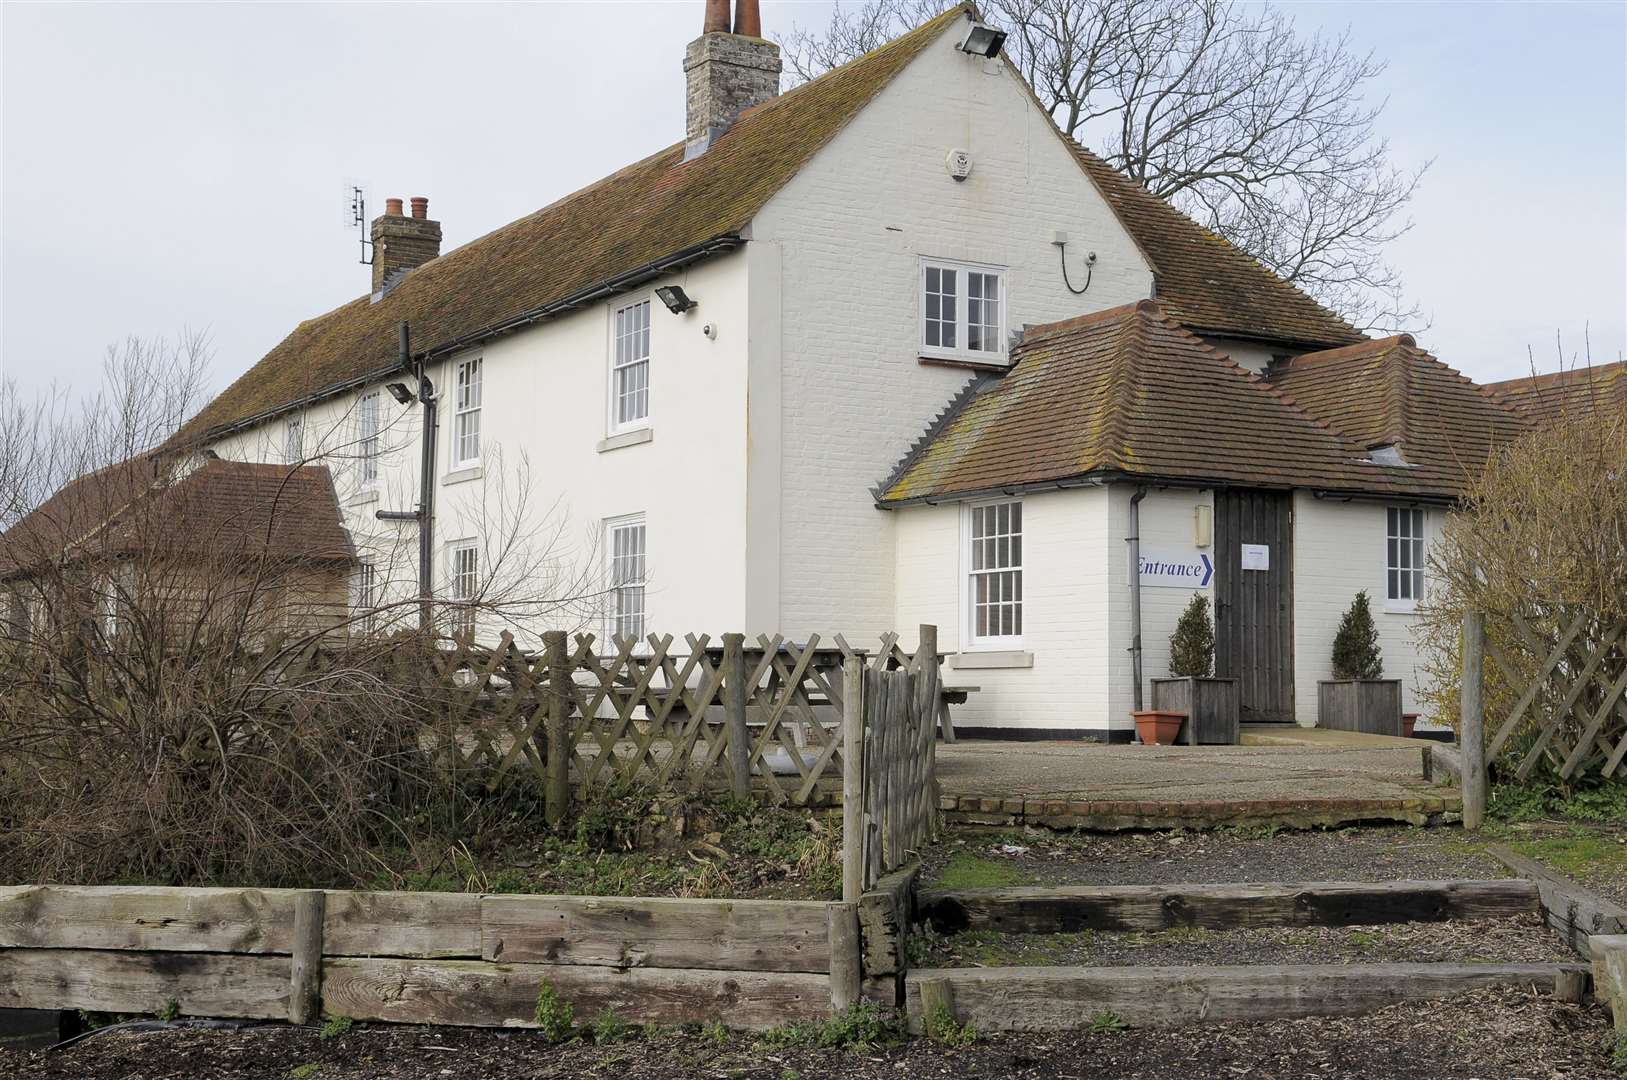 The Ferry House Inn in Harty Ferry, Sheppey